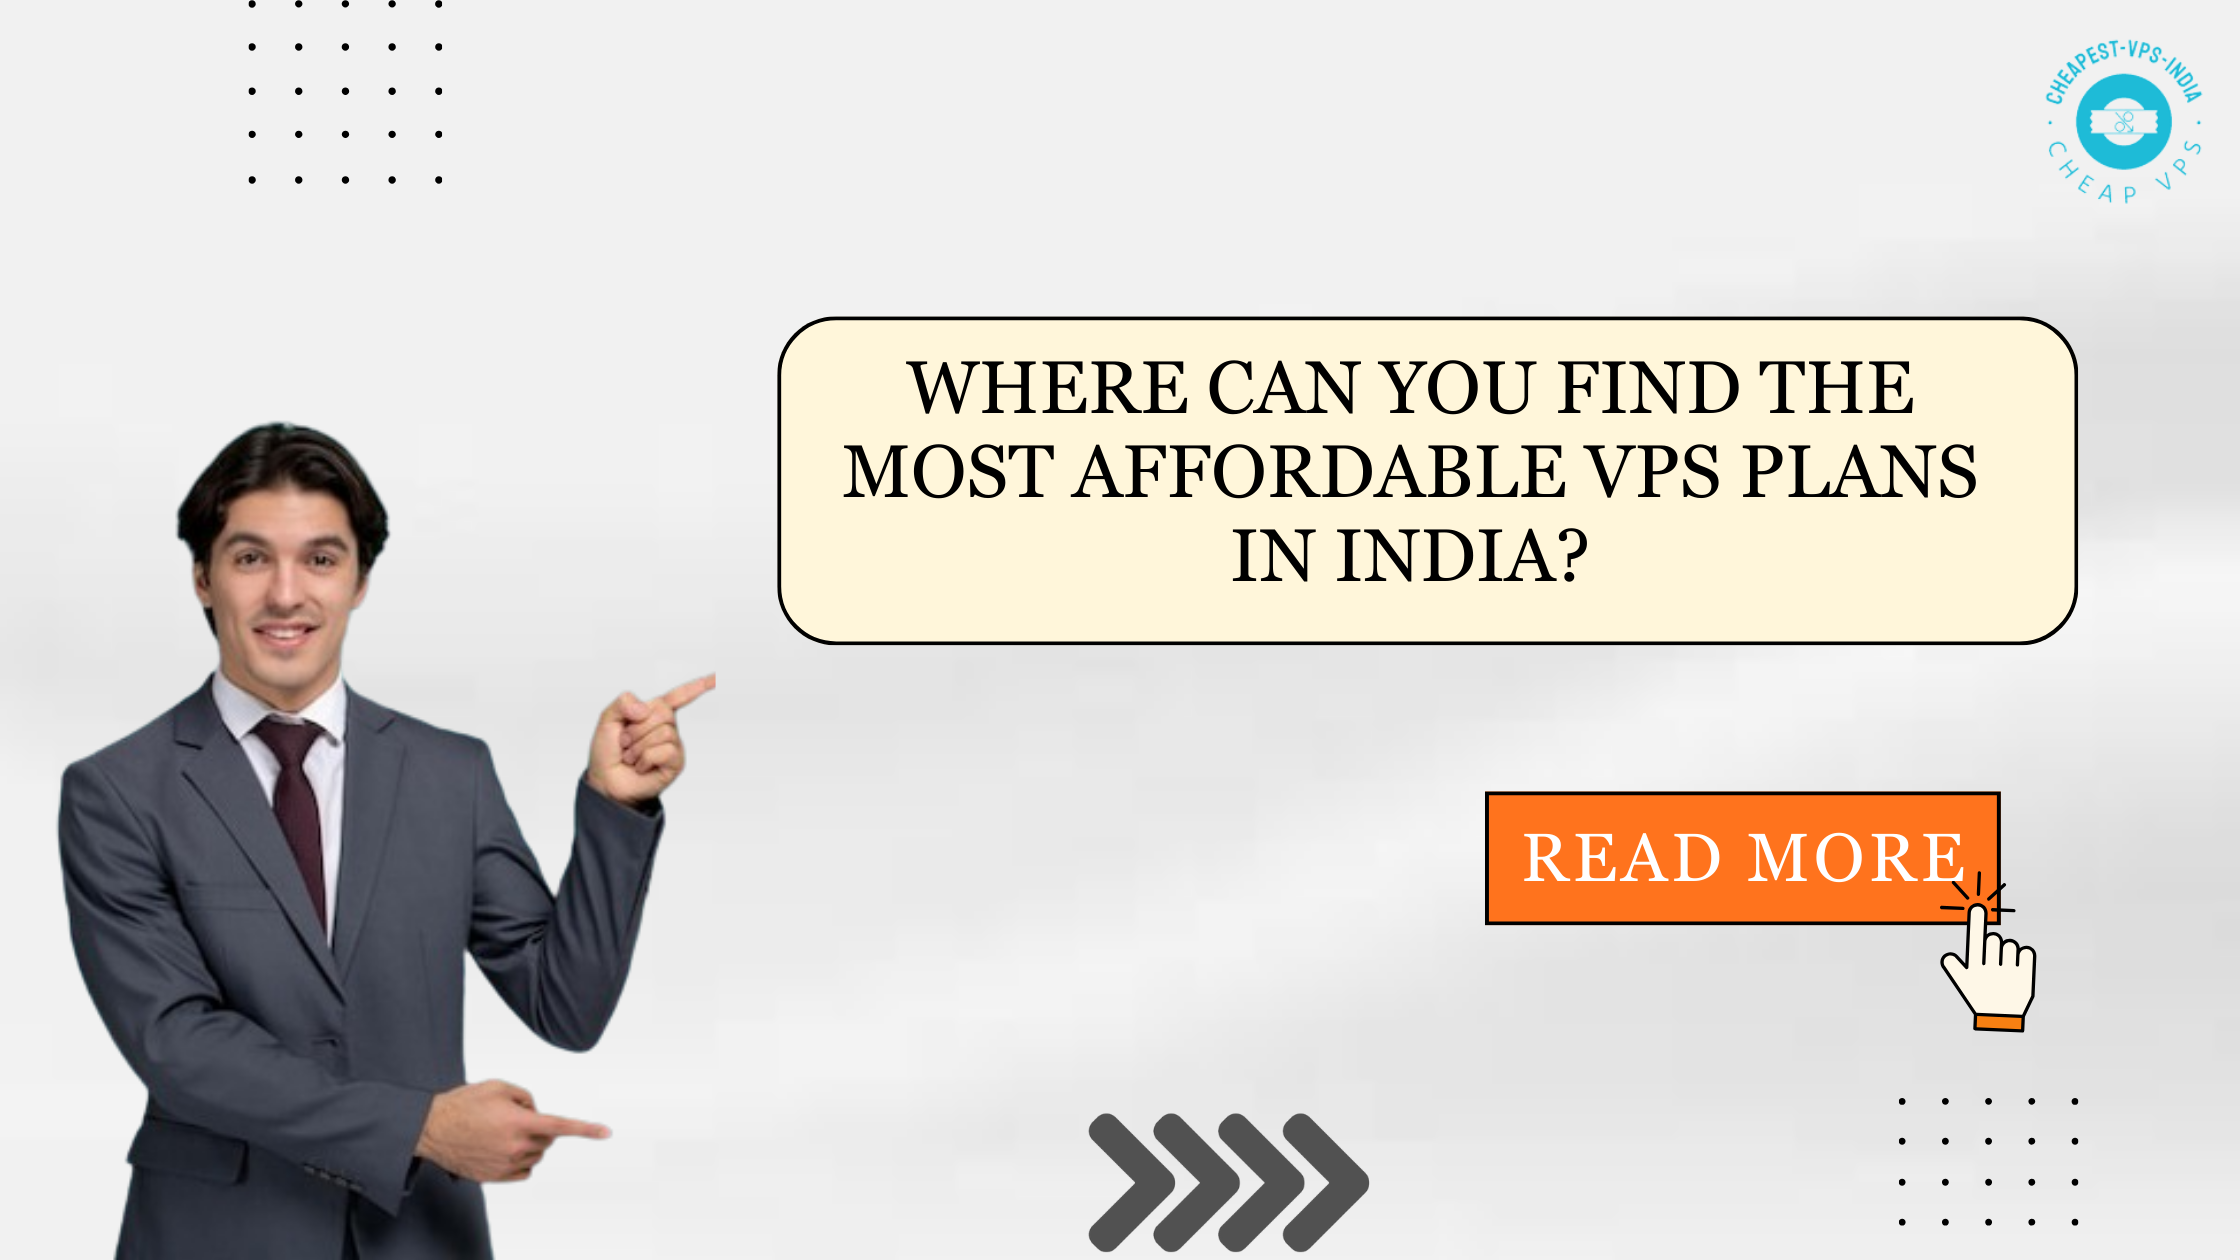 Where Can You Find the Most Affordable VPS Plans in India